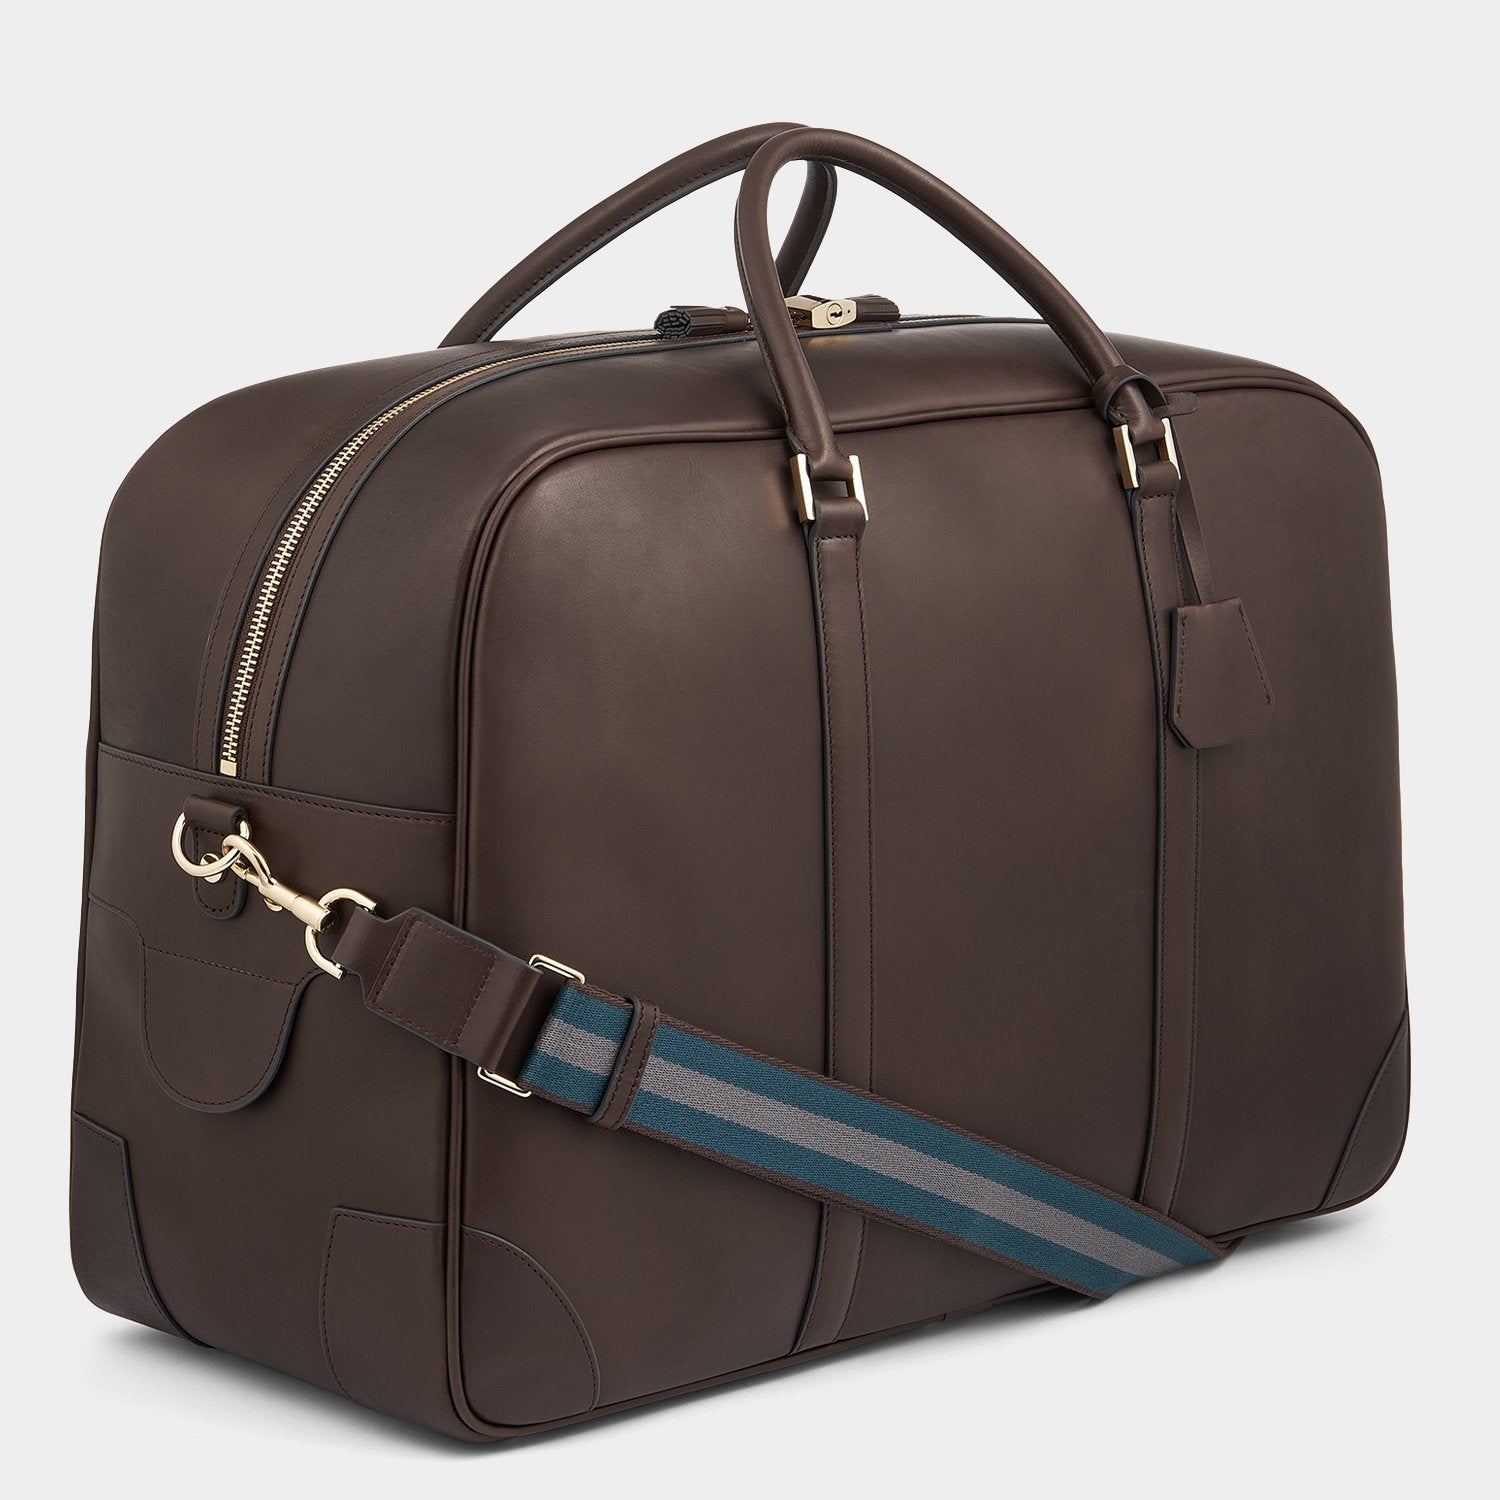 Bespoke Weekend Latimer -

                  
                    Butter Leather in Chocolate -
                  

                  Anya Hindmarch US
